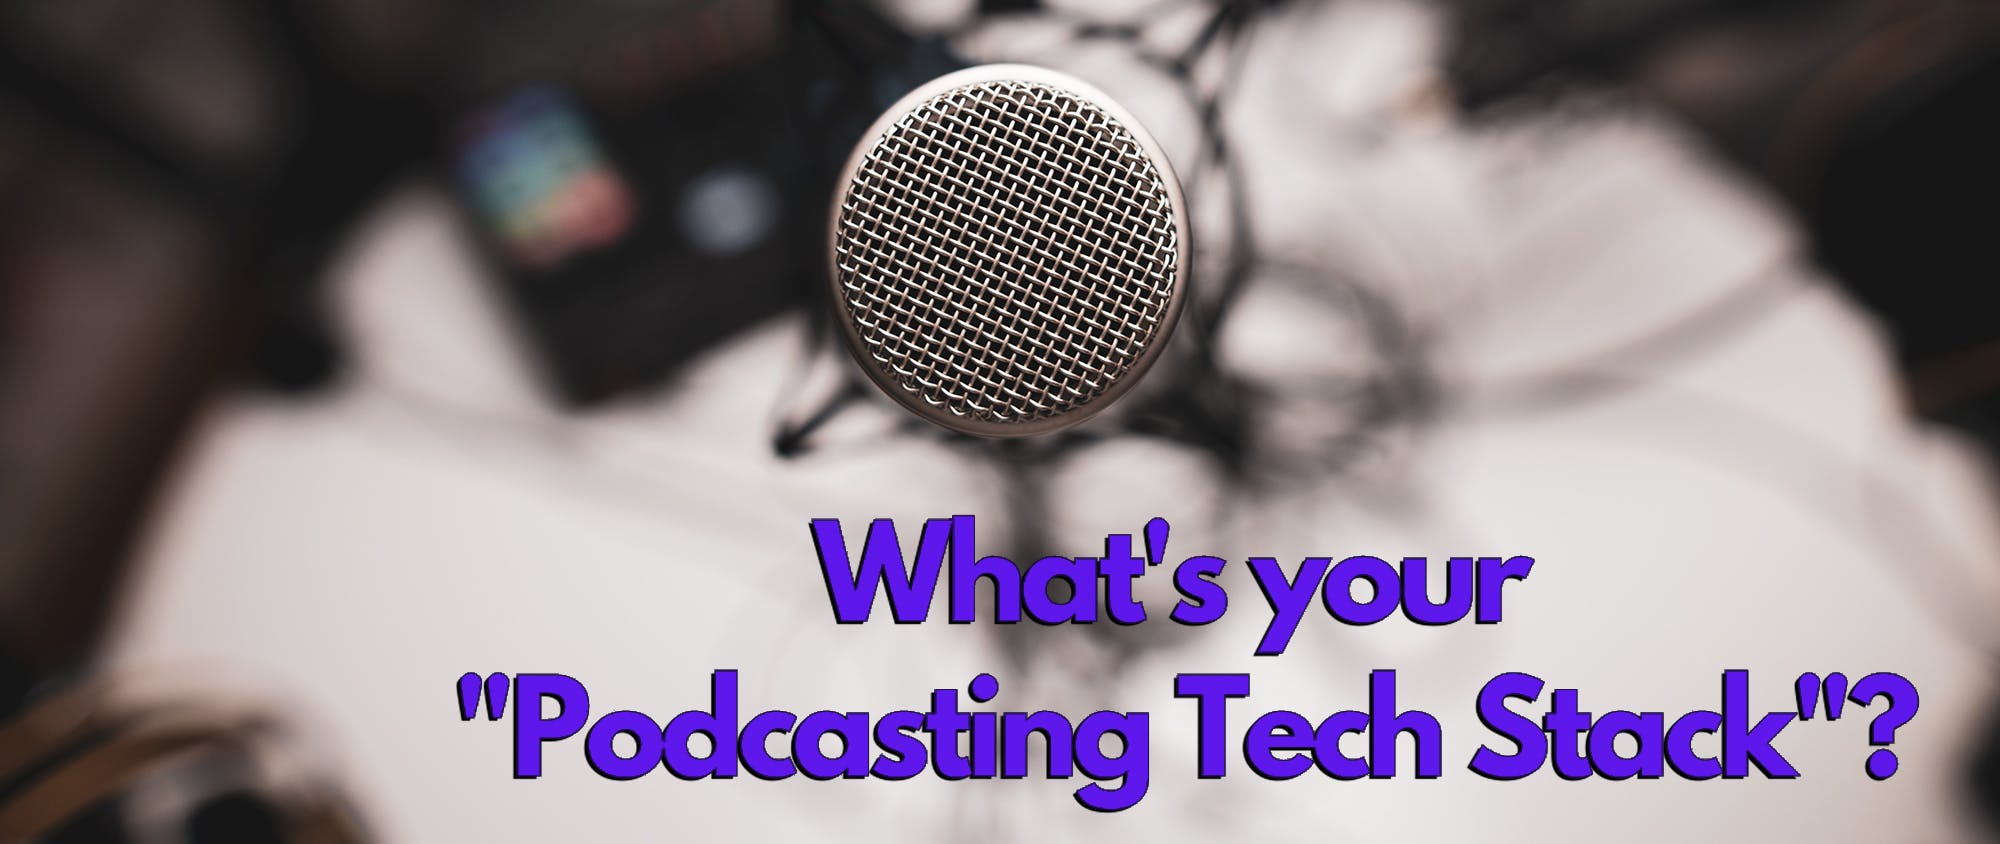 Podcasting Tech Stack